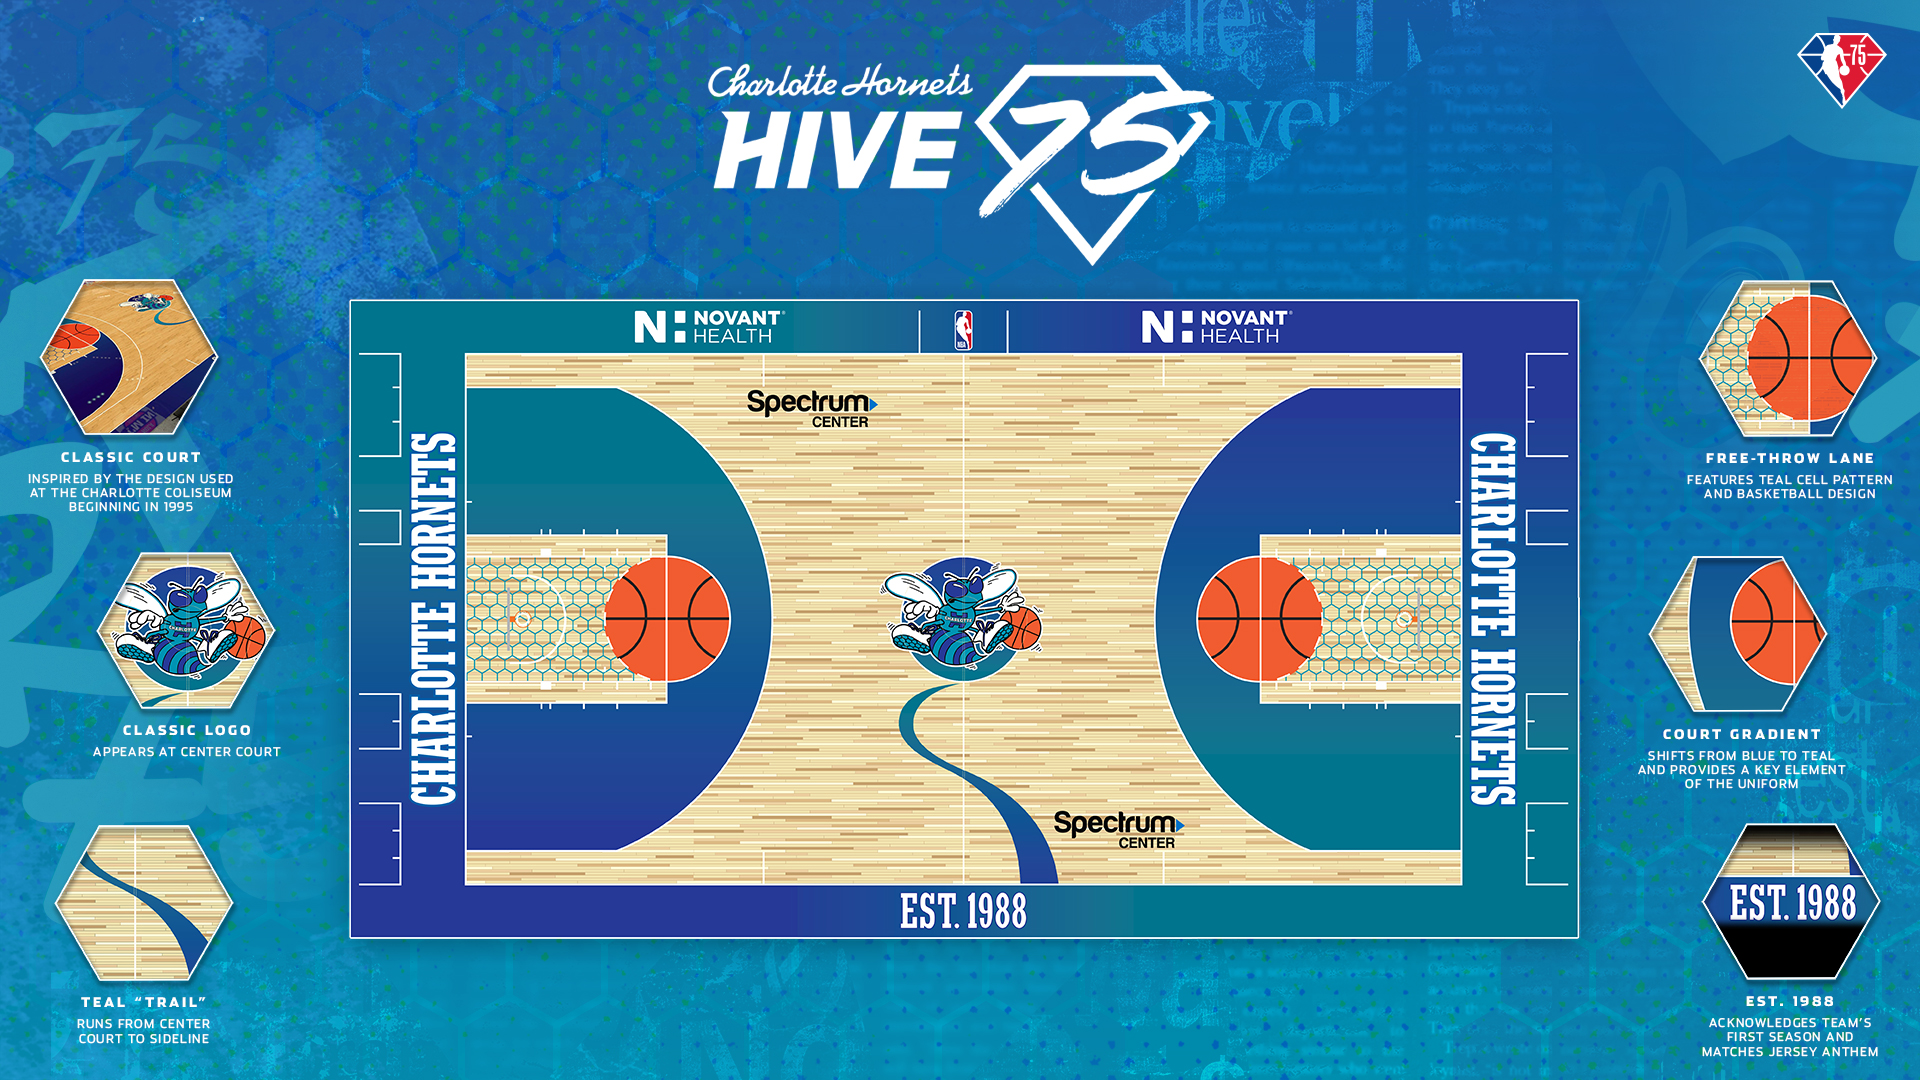 Charlotte Hornets on X: Best. Court. Ever. 🤩 We're psyched to